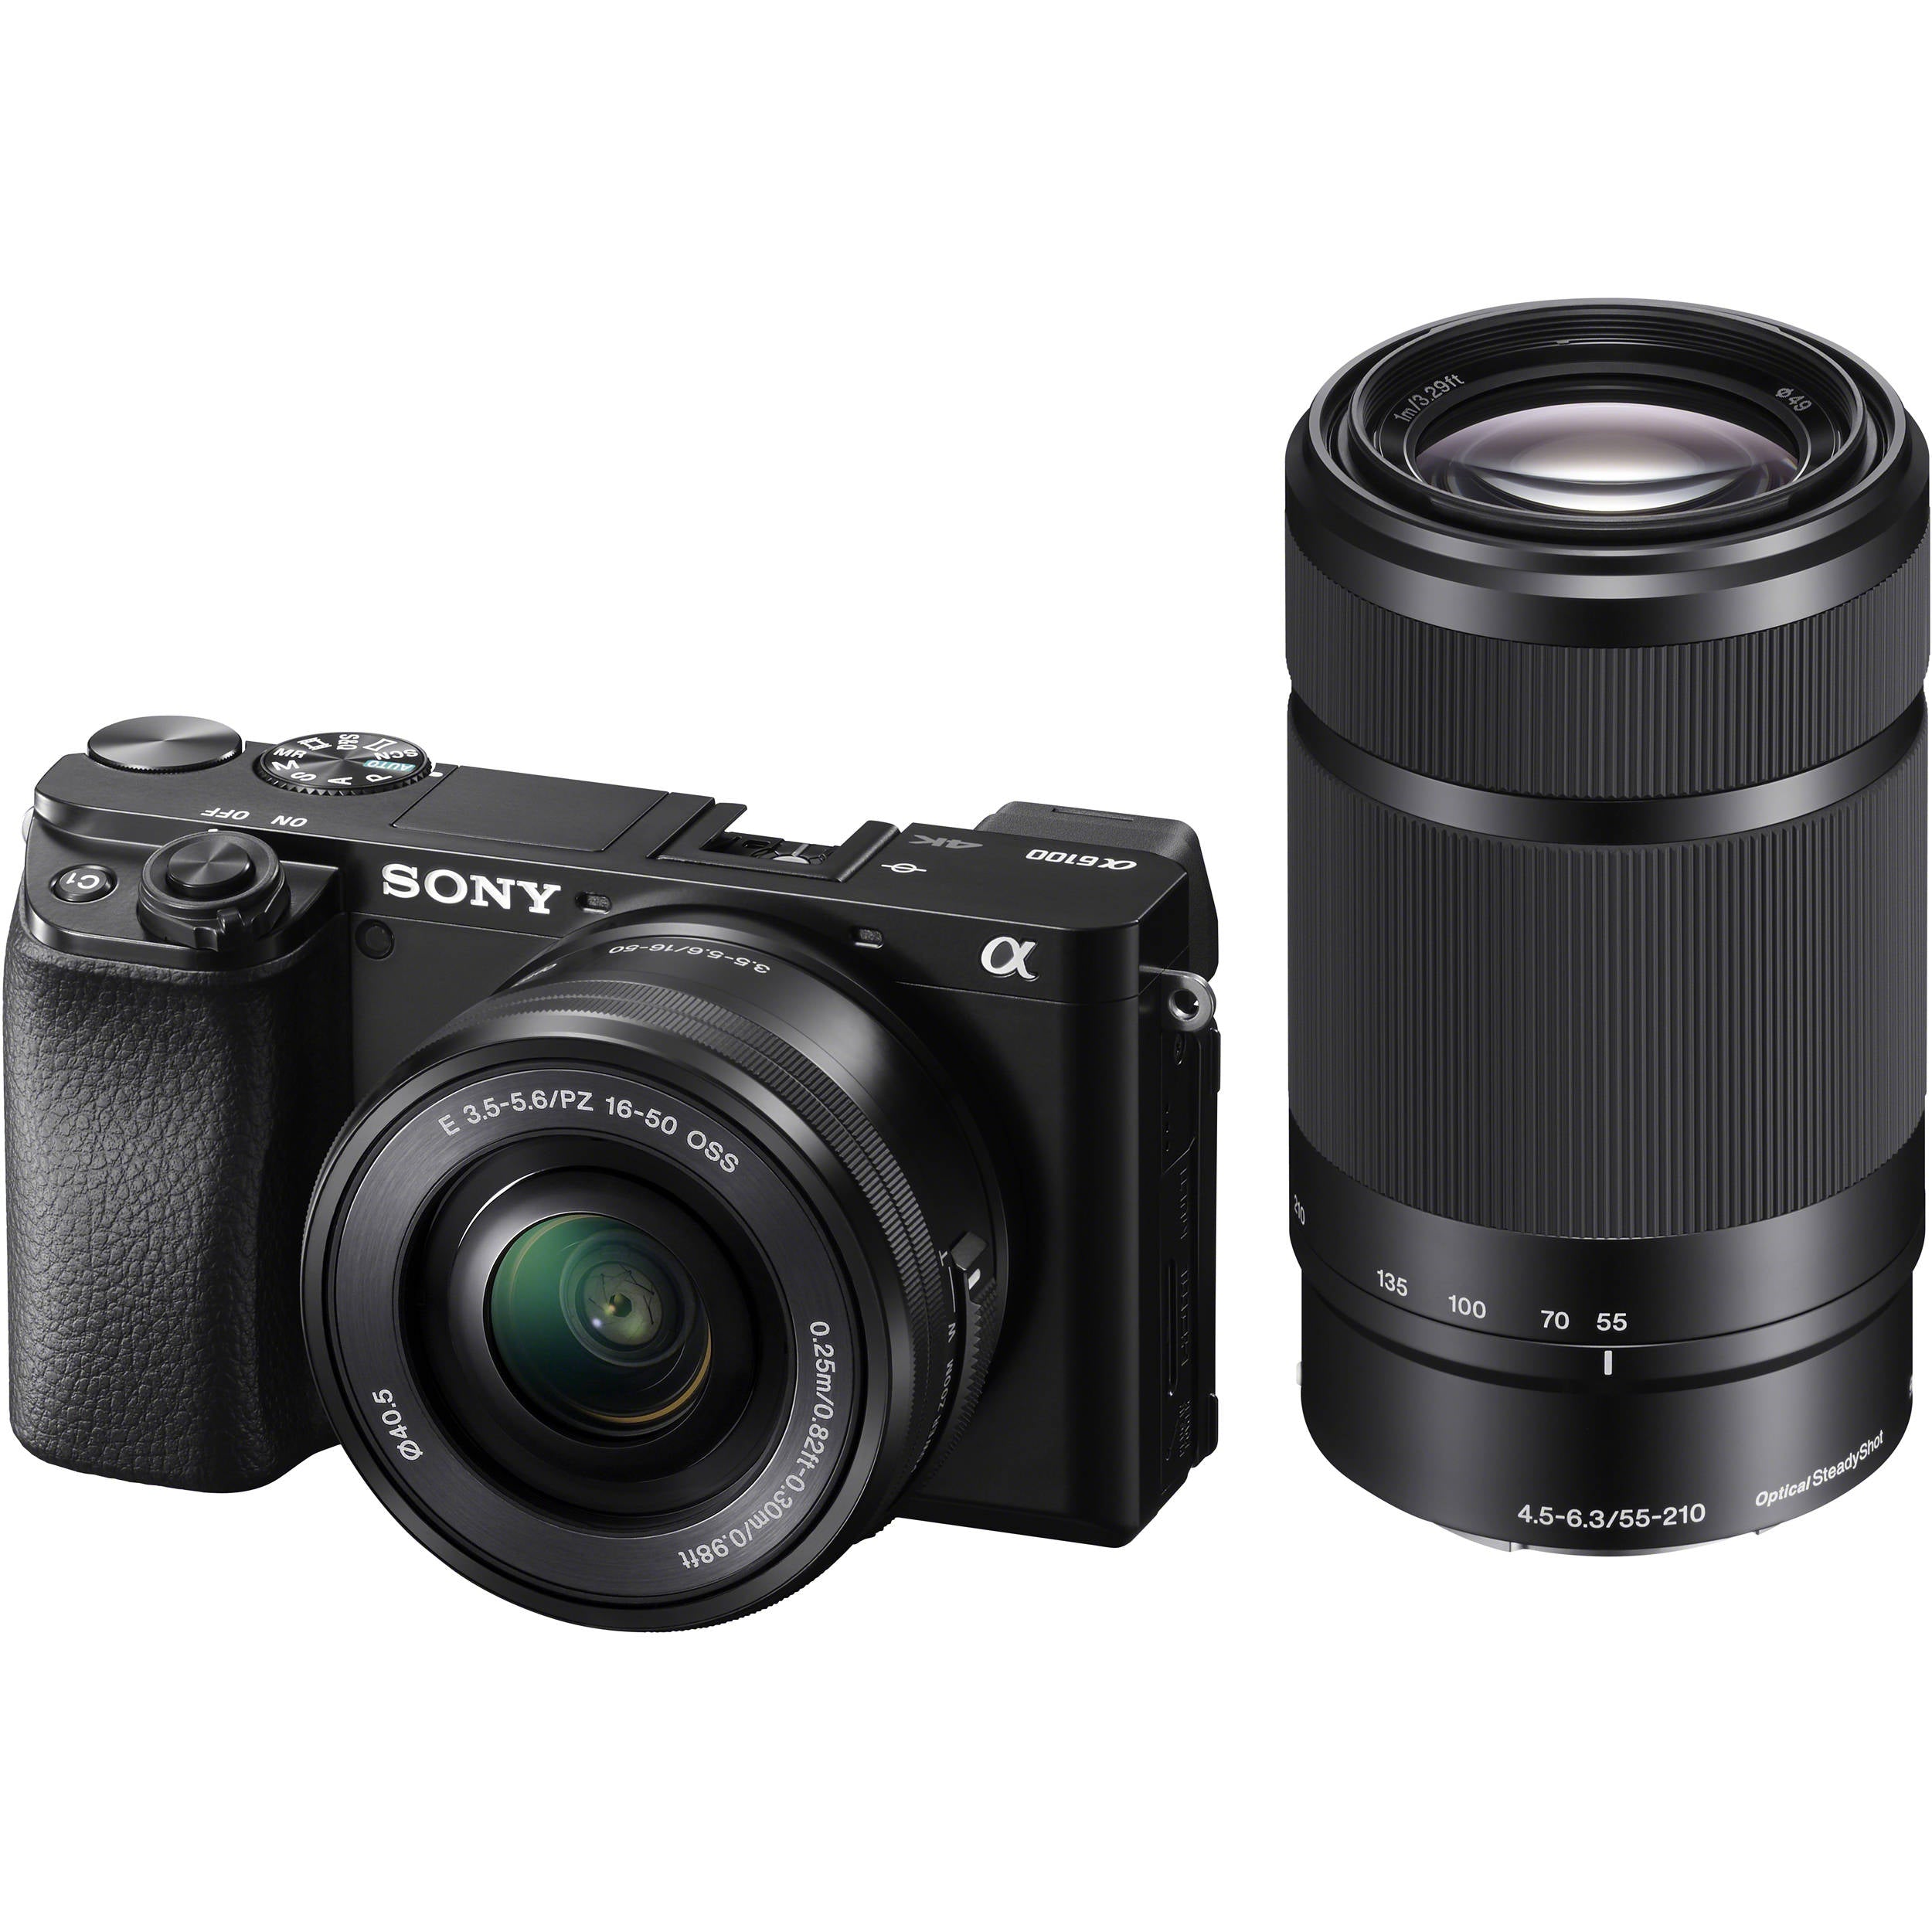 Sony Alpha a6100 24.2MP Mirrorless Camera - Black (with 16-50mm and 55-210mm Len